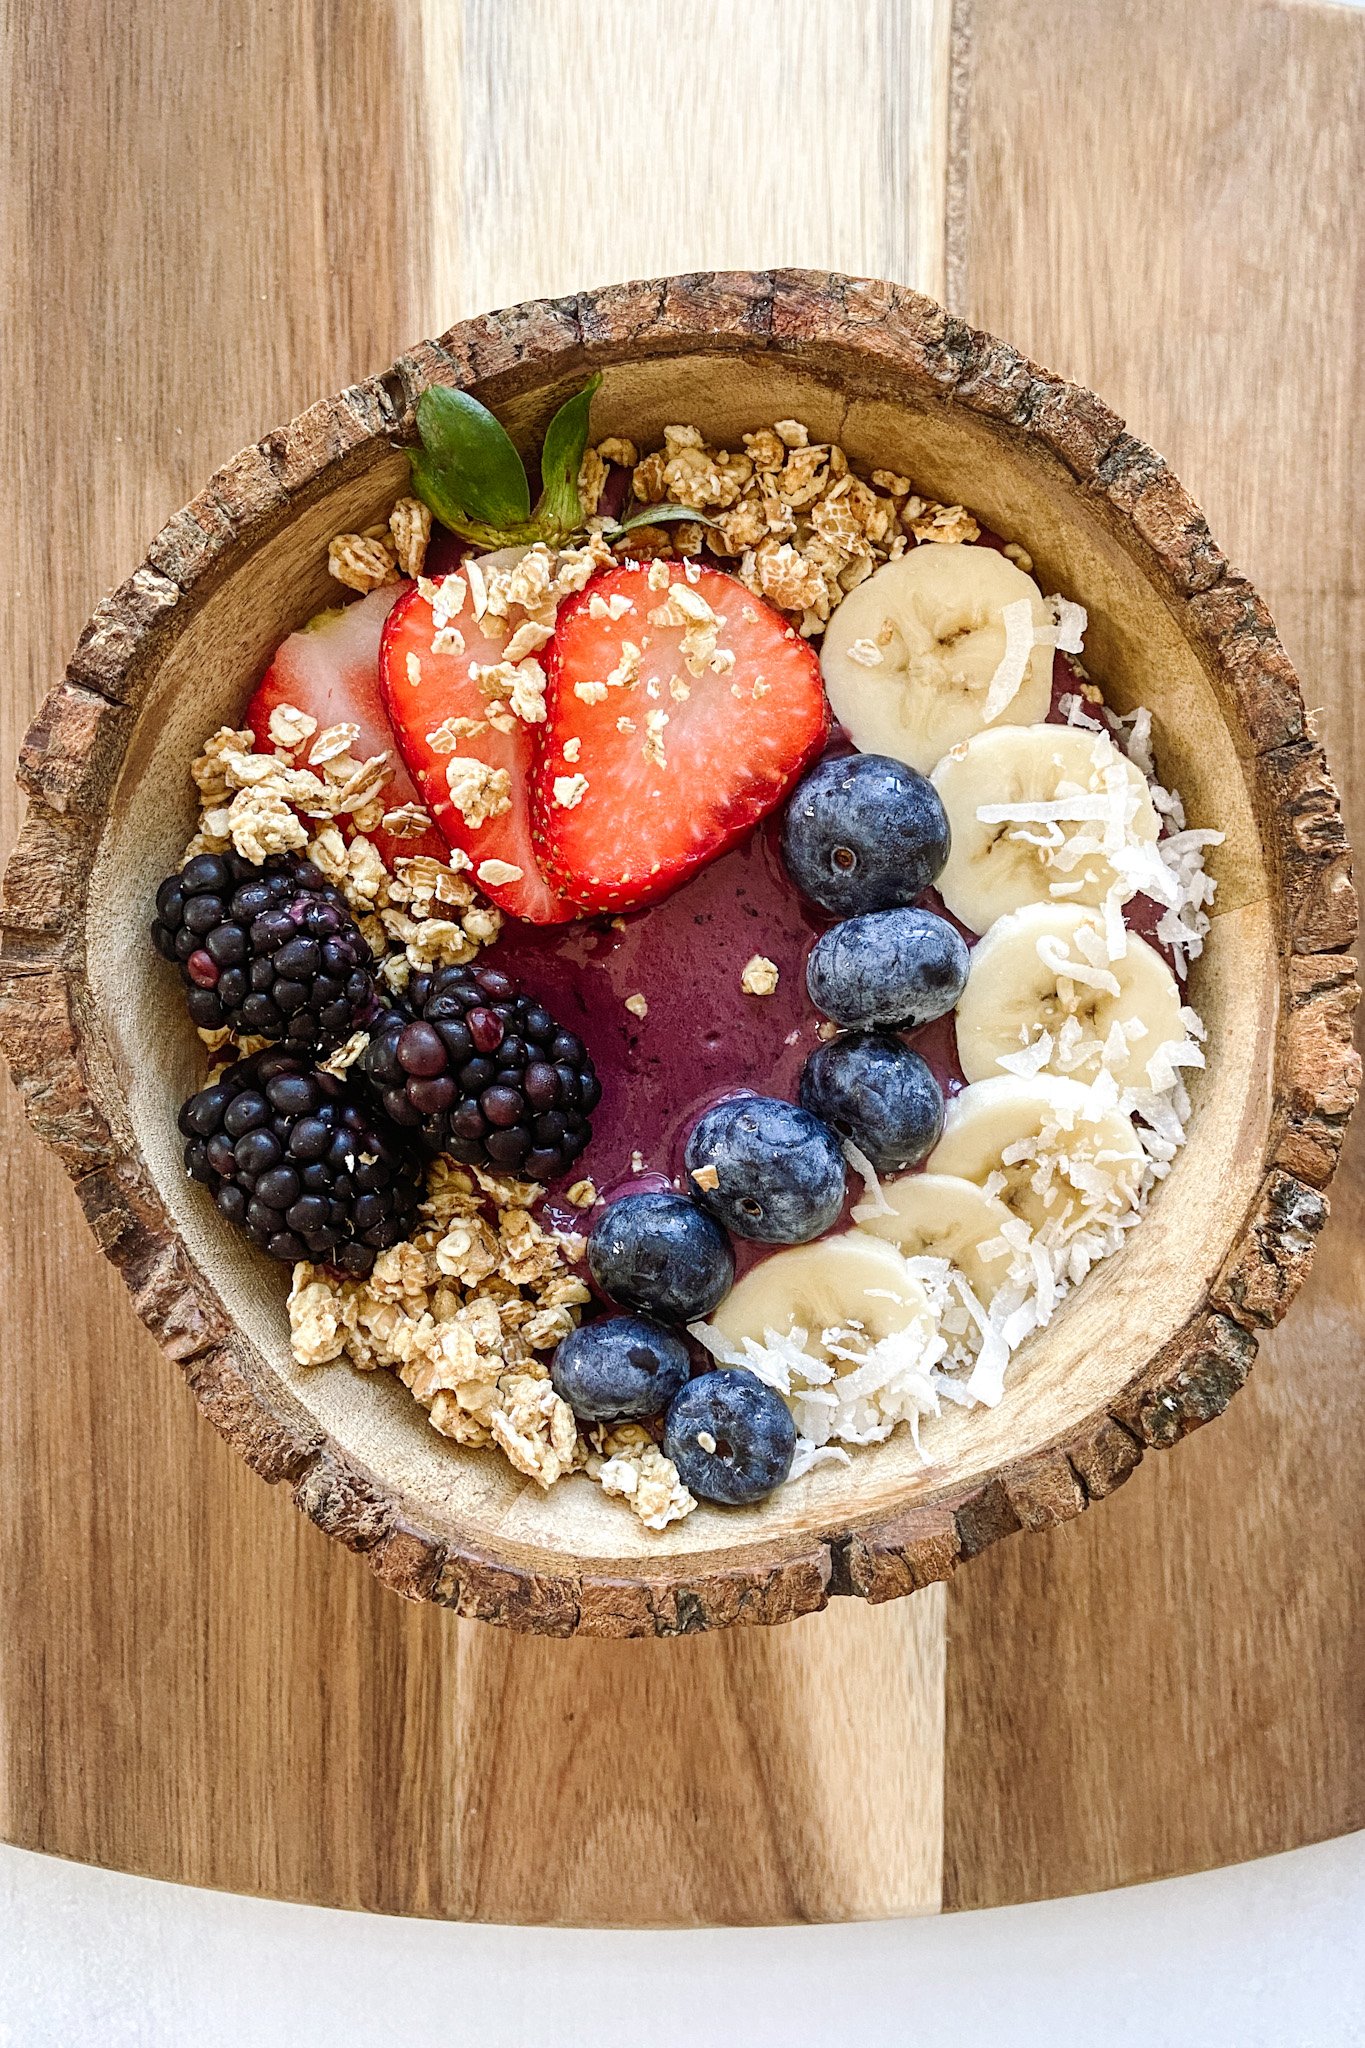 Acai bowl topped with granola, sliced bananas, blueberries, blackberries and strawberries